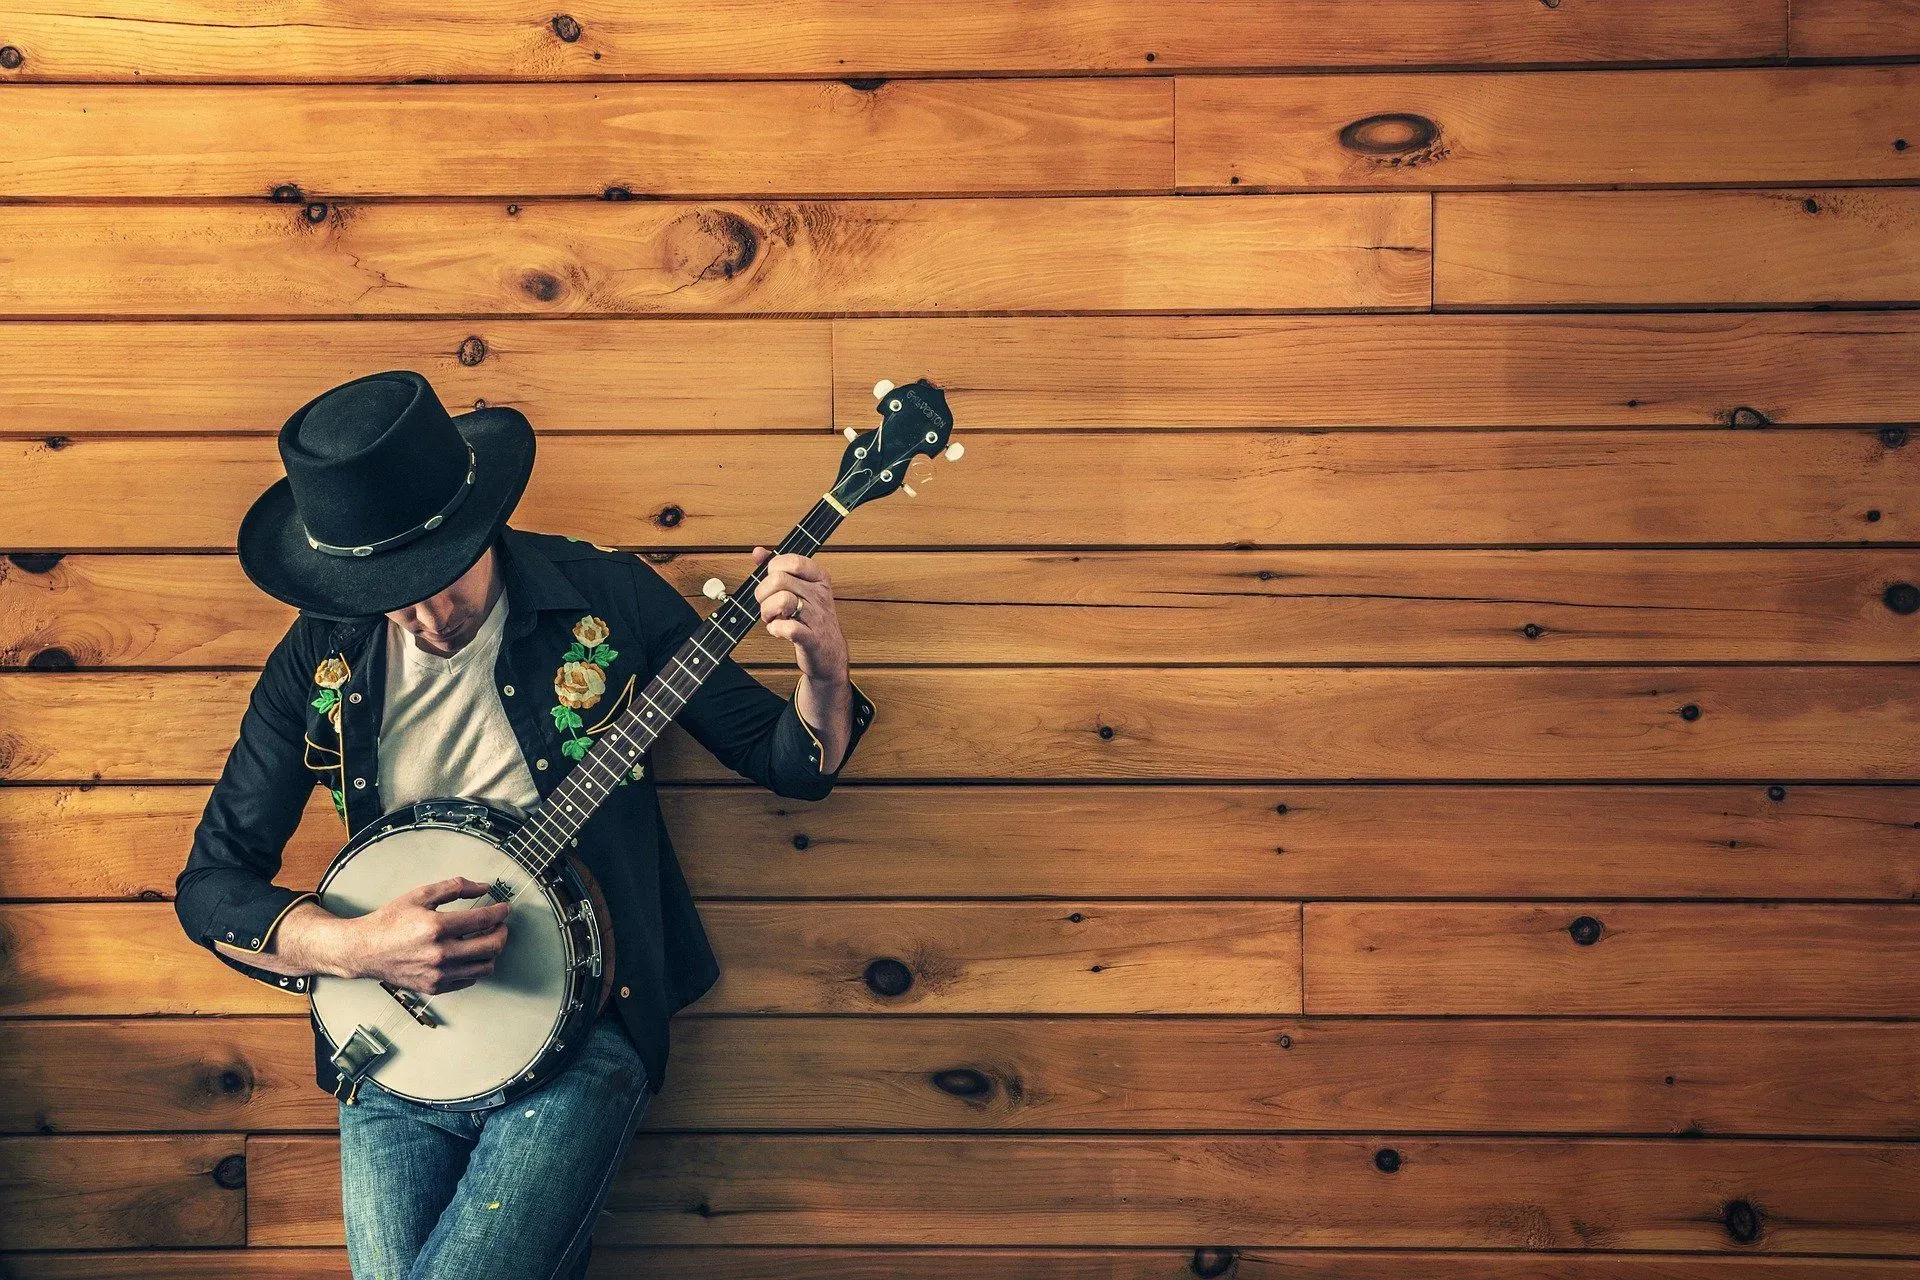 The preferred image for country music was the cowboy, and the instrument most often played was the banjo.